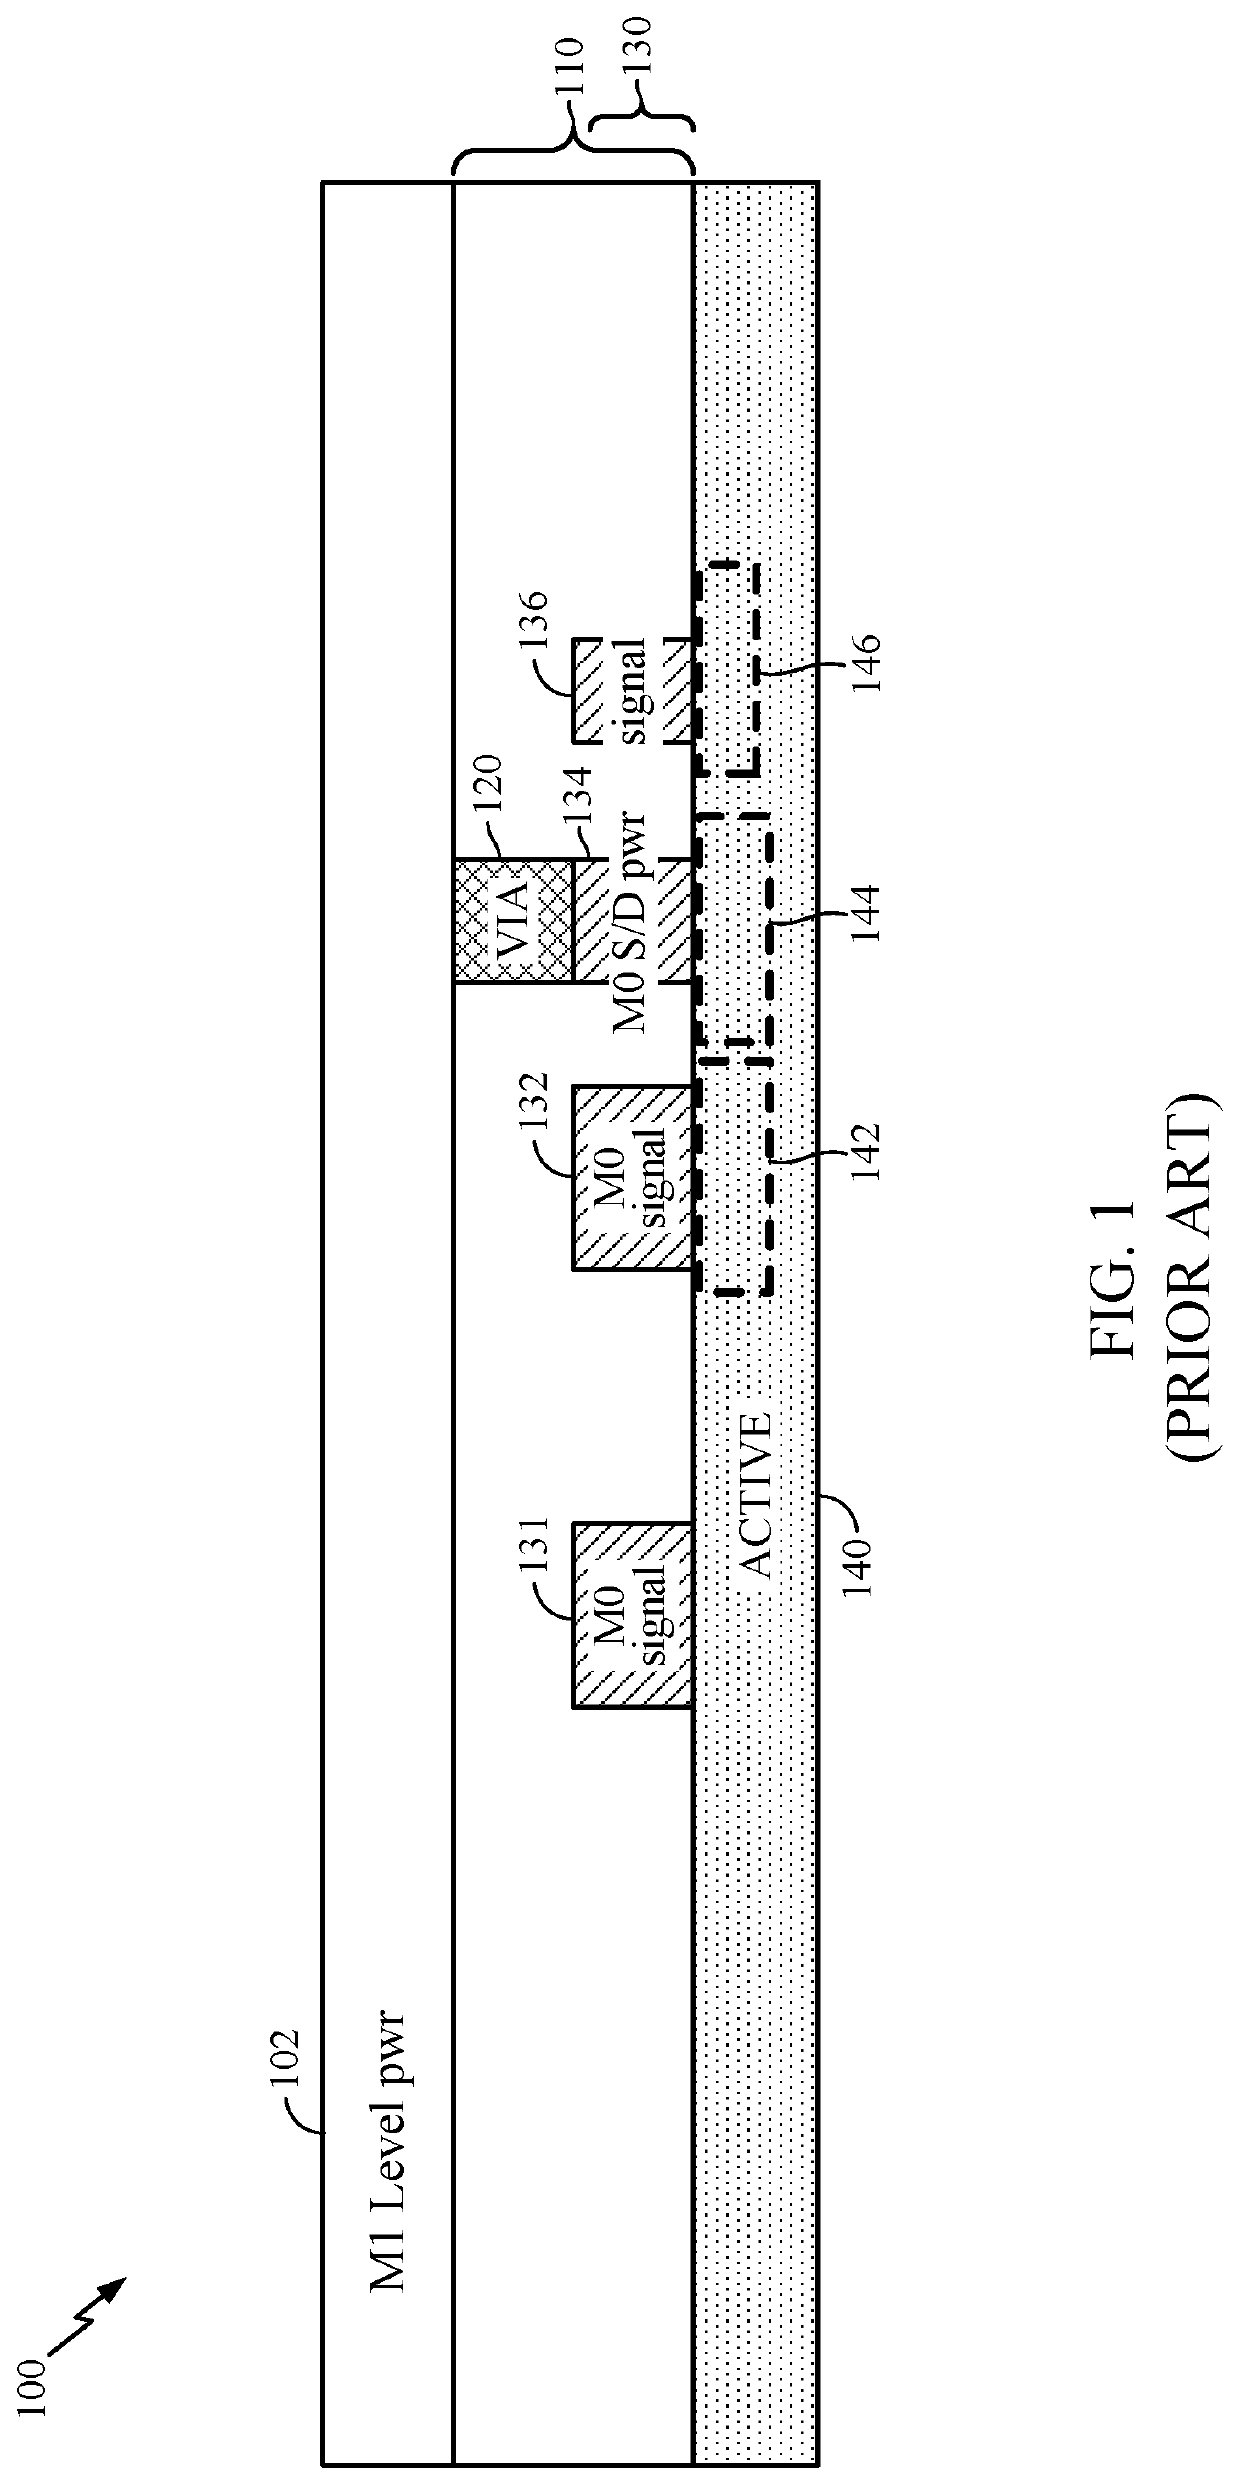 Metal filling under m1 layer of semiconductor devices